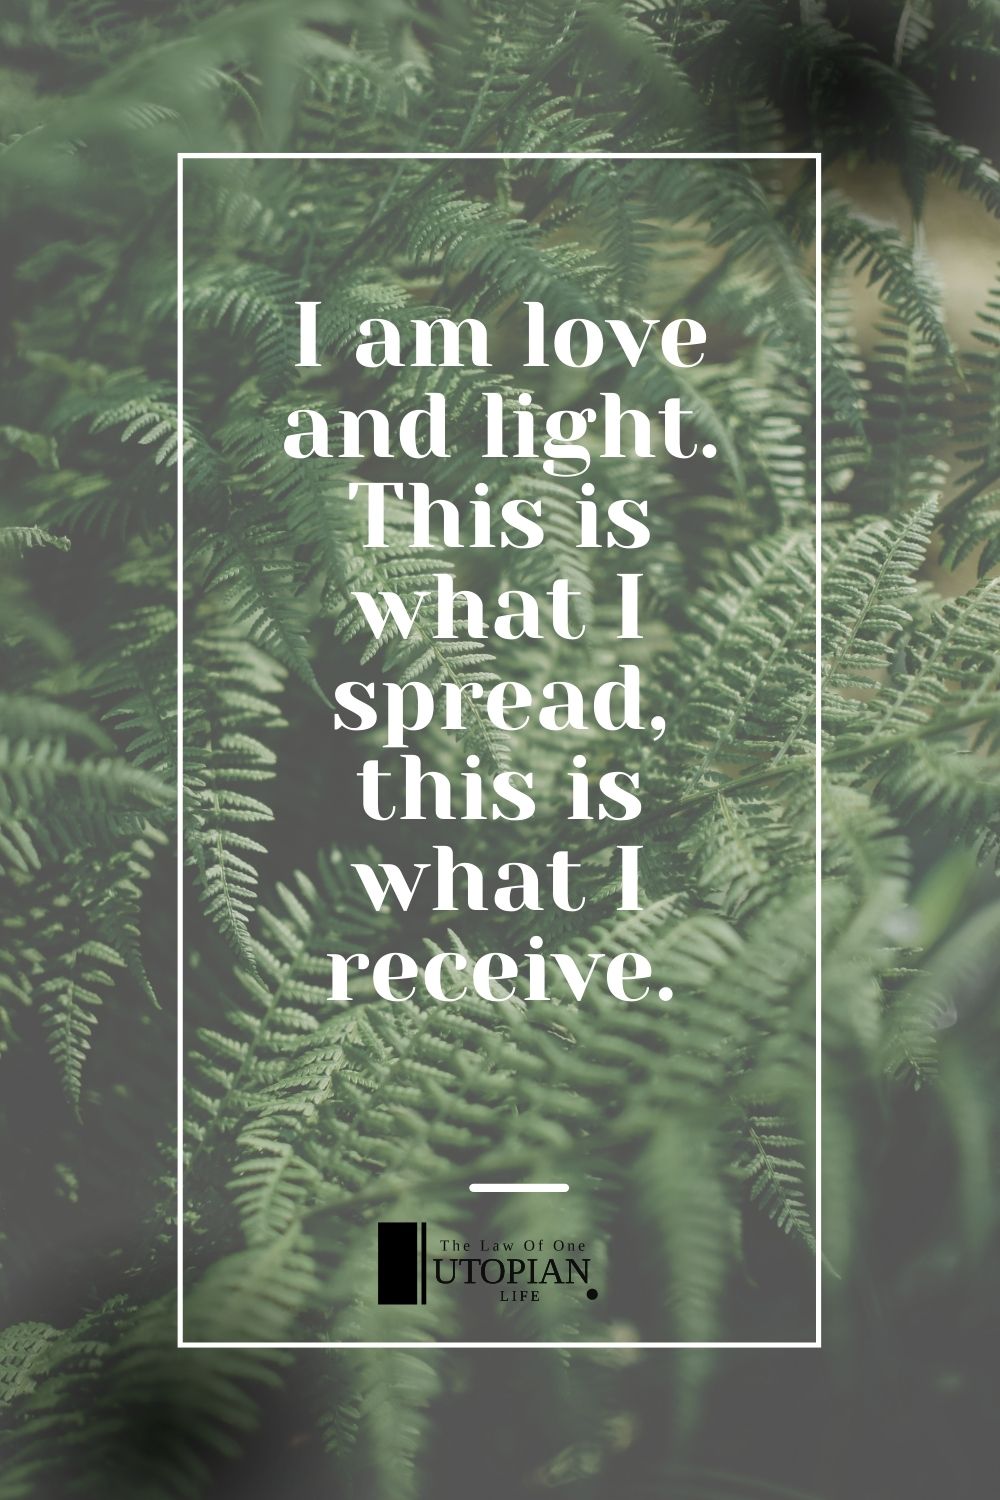 I Am Love And Light. This Is What I Spread, This Is What I Receive.| Utopian Life | Affirmations For Difficult Times